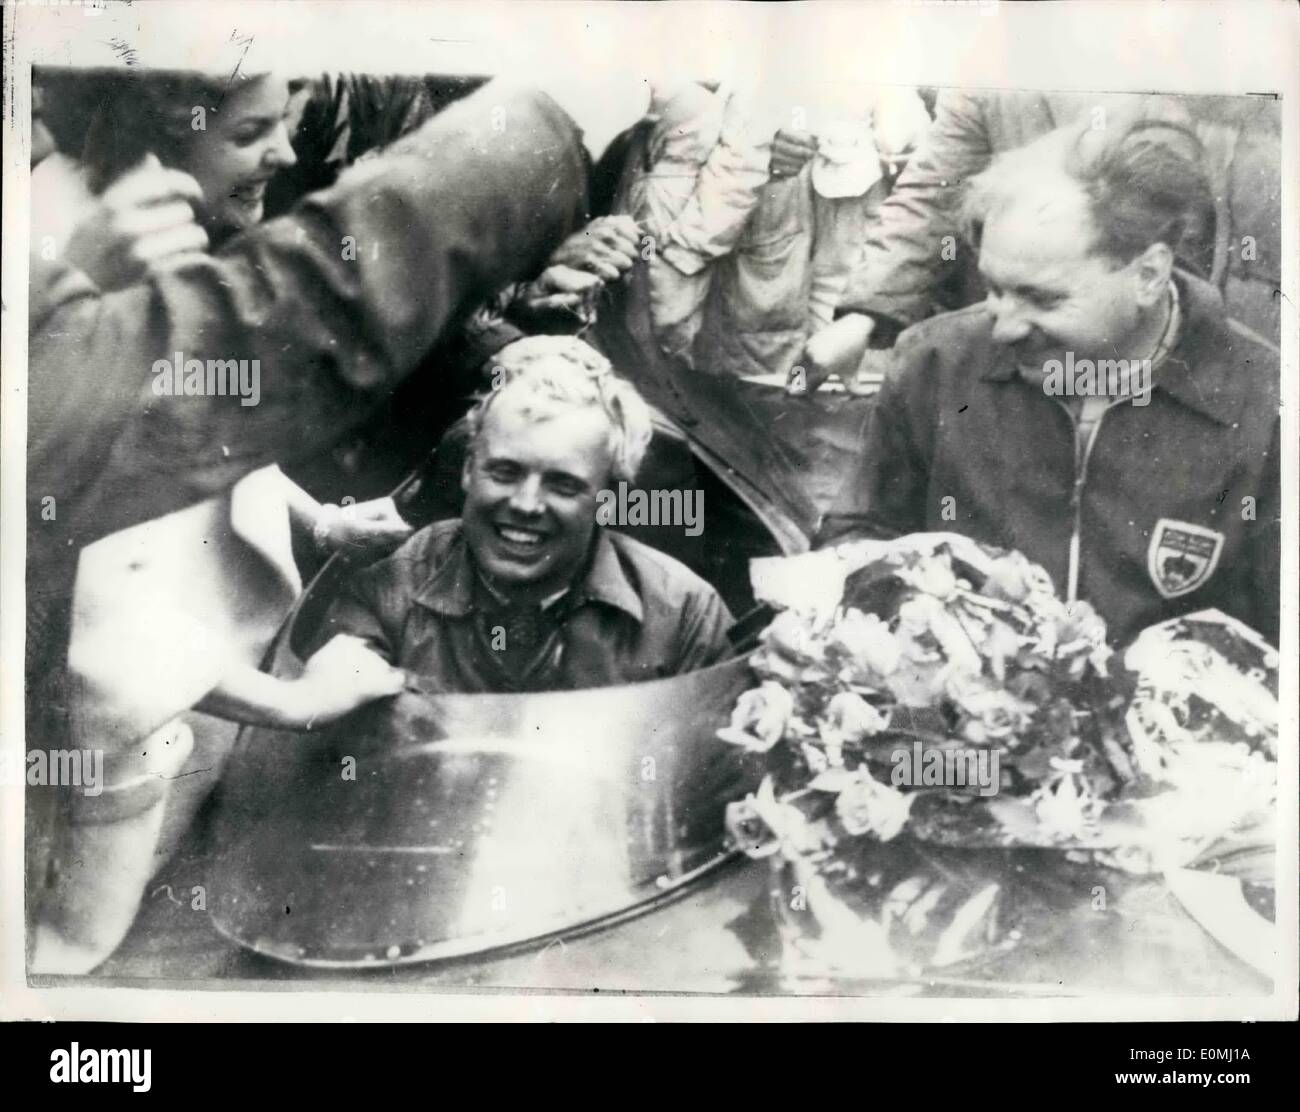 Jun. 06, 1955 - Mike hawthorn wins the Le mans race. photo shows mike hawthorn (left), seen after winning the Le mans 24-hour co-driver Ivor Bueb. Stock Photo